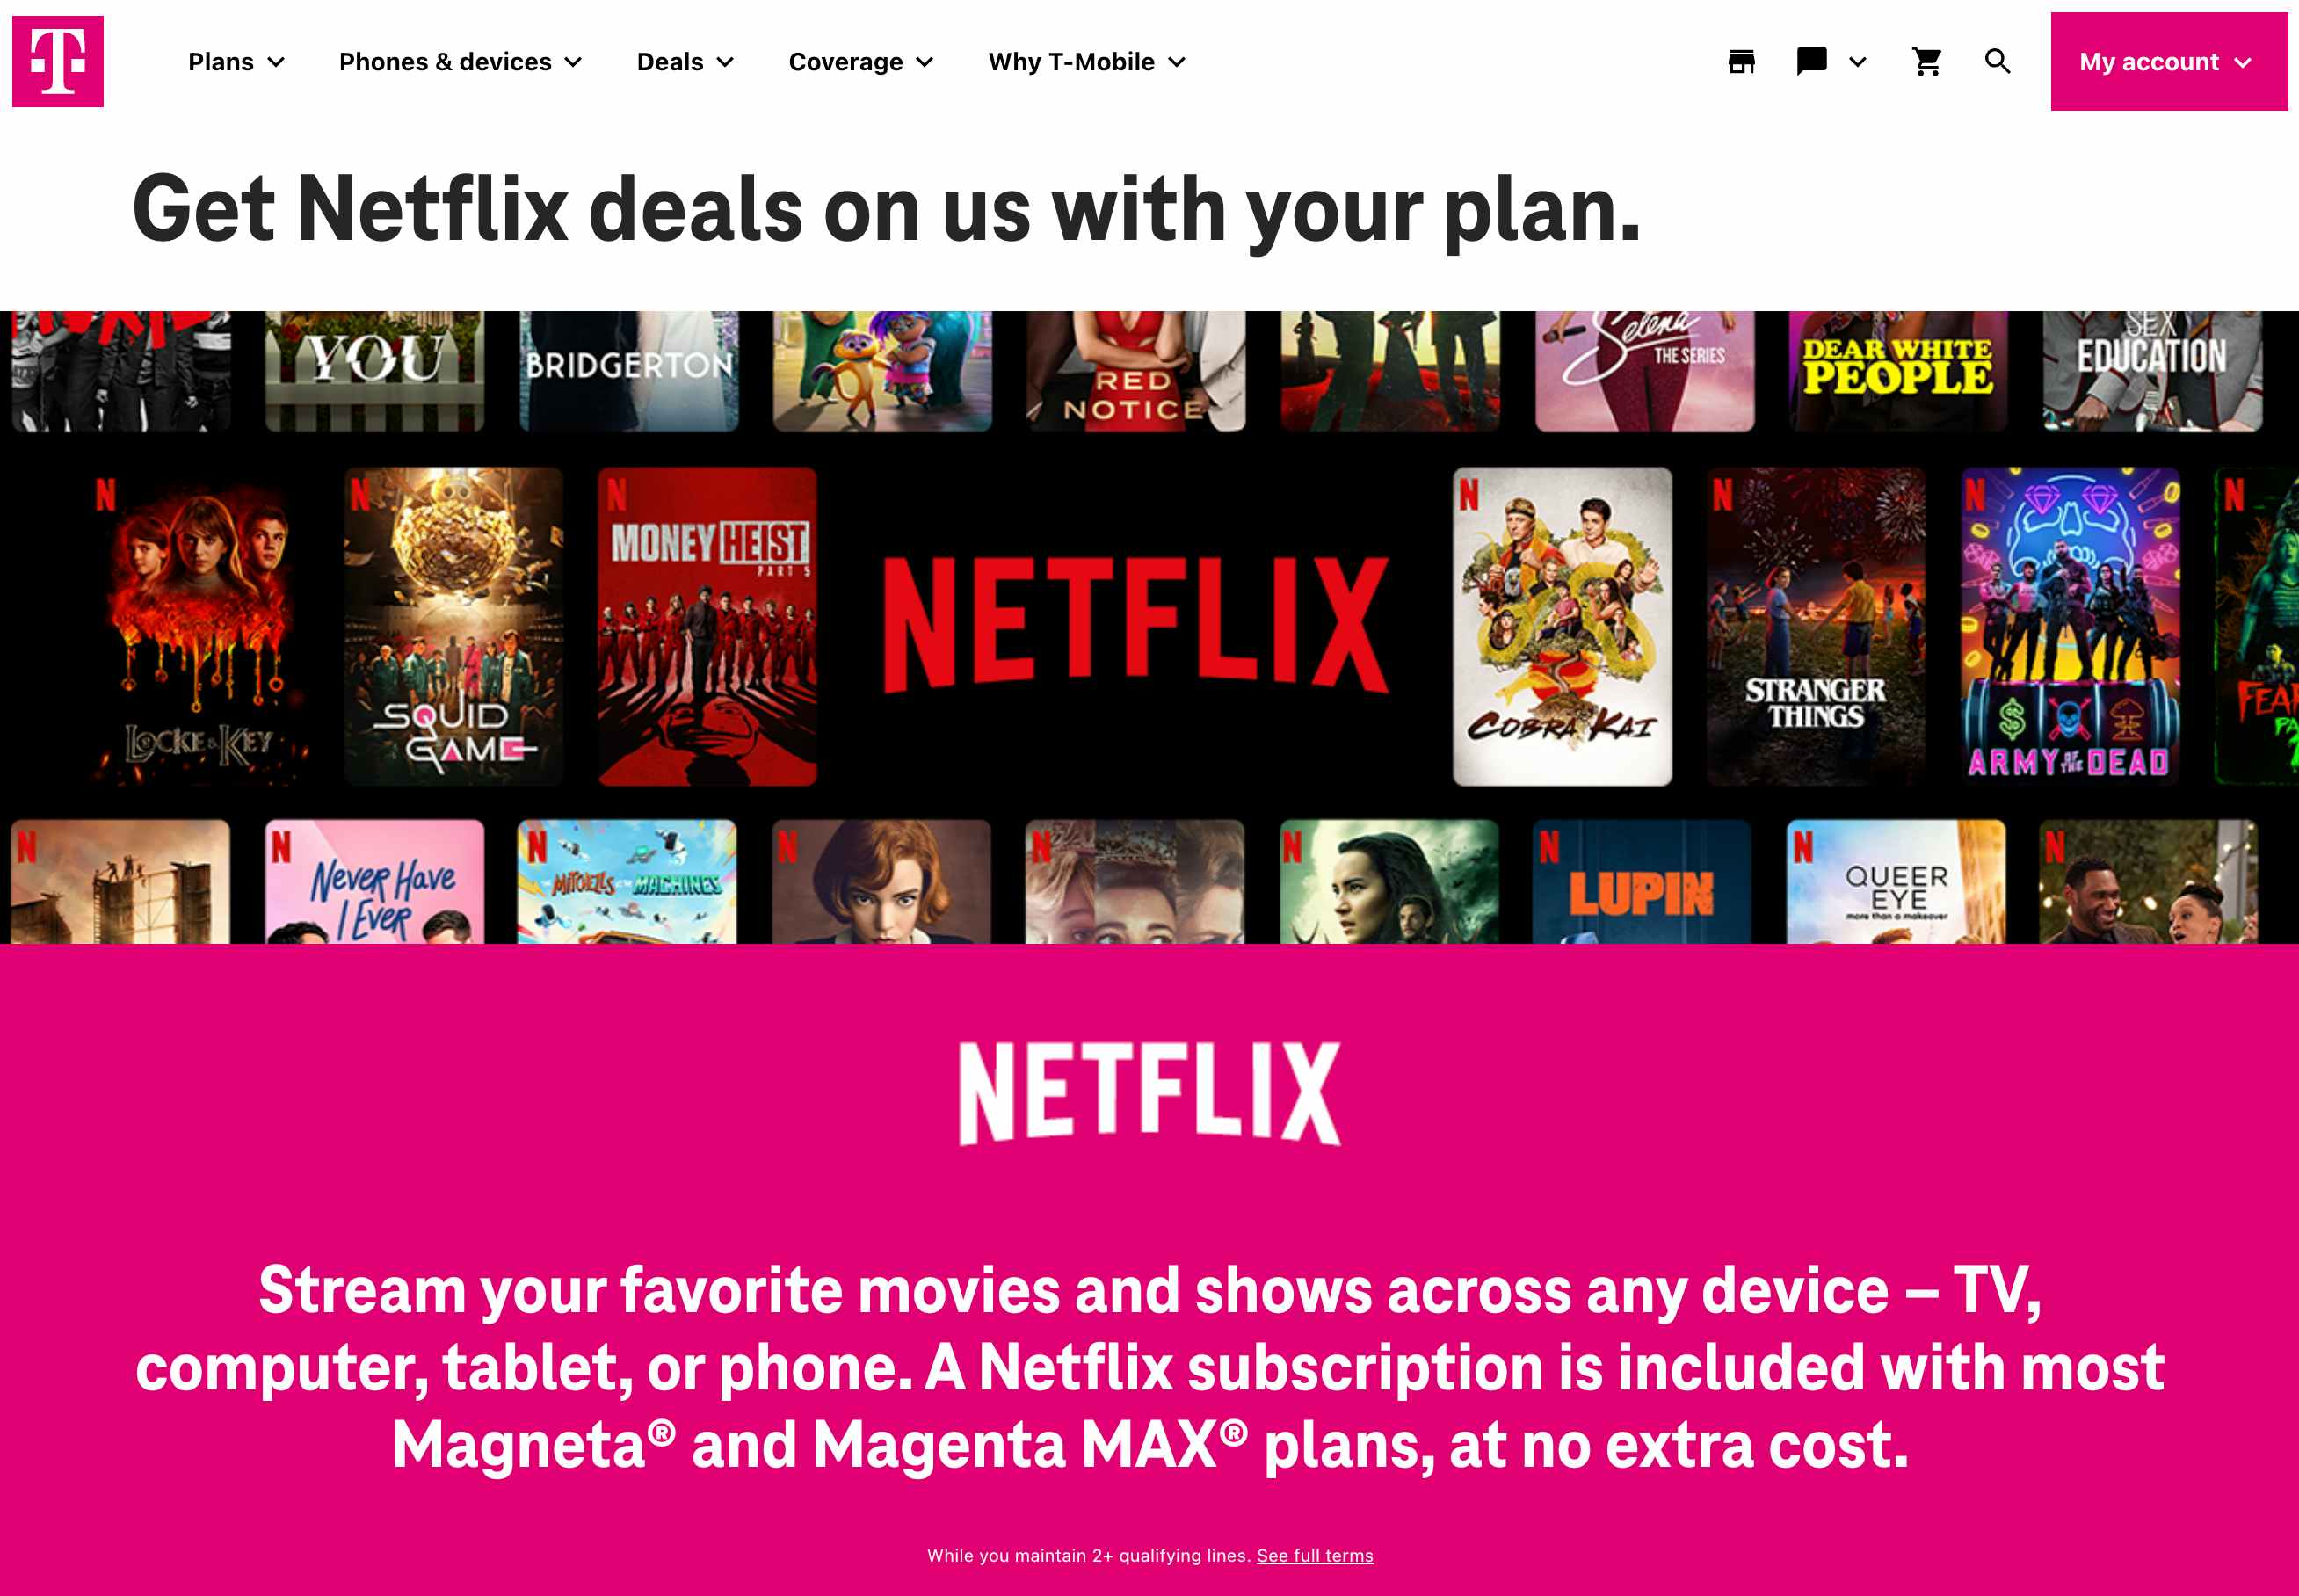 netflix cost per month is free for t-mobile phone plan subscribers